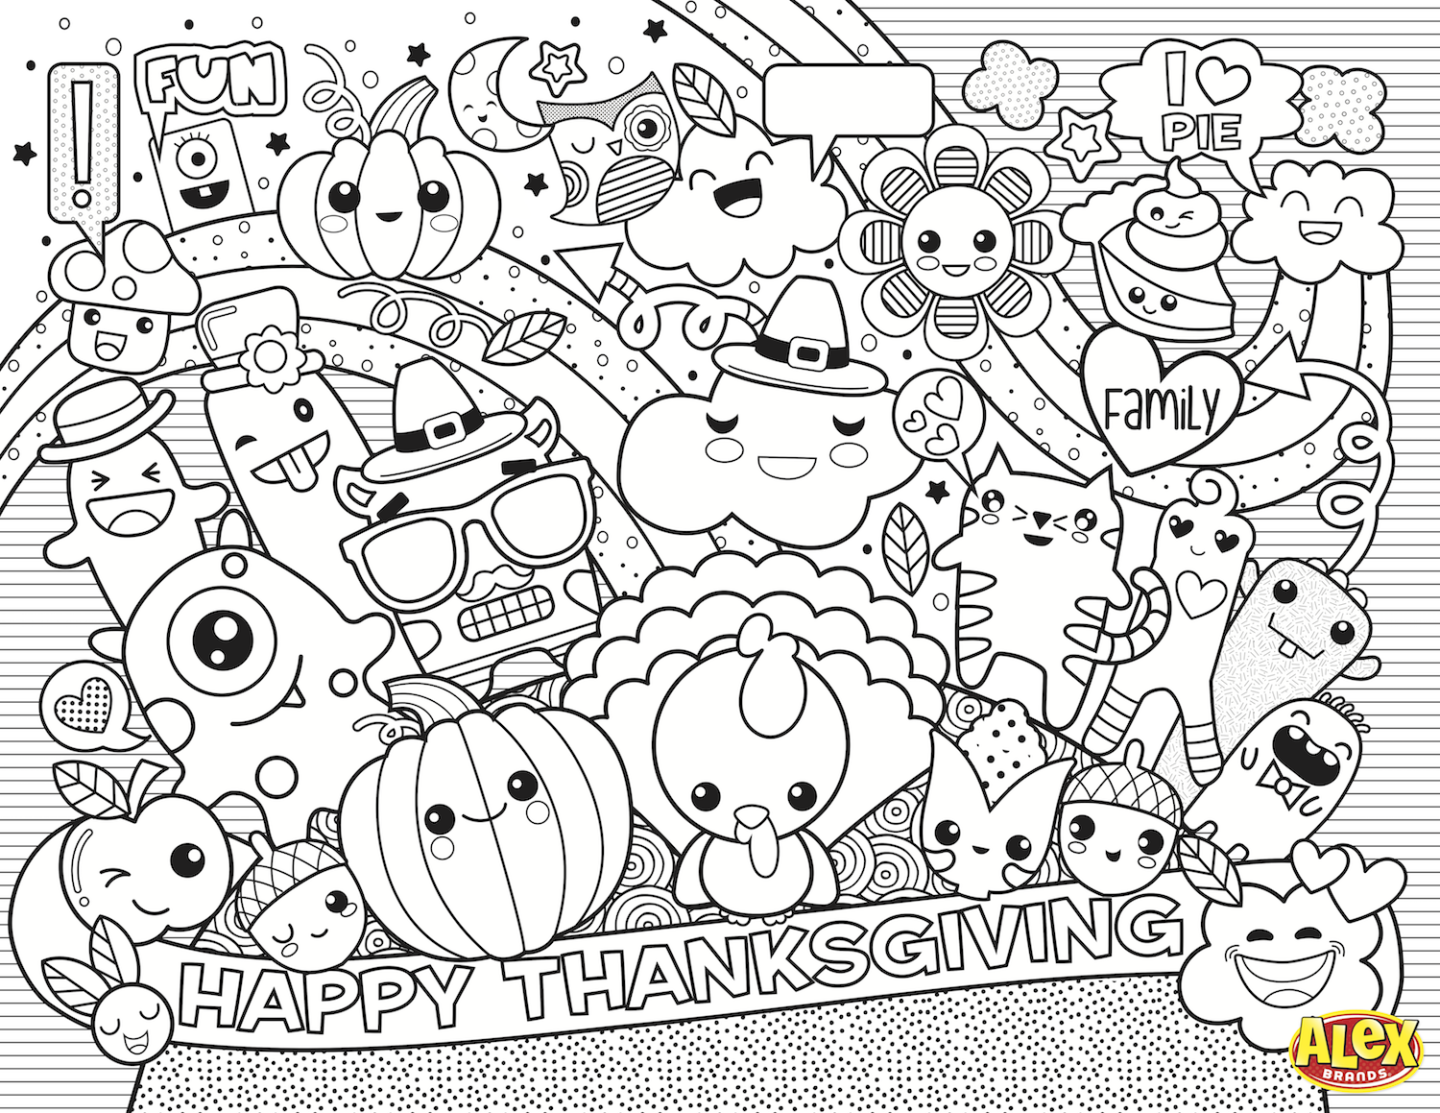 Thanksgiving coloring pages to print for kids